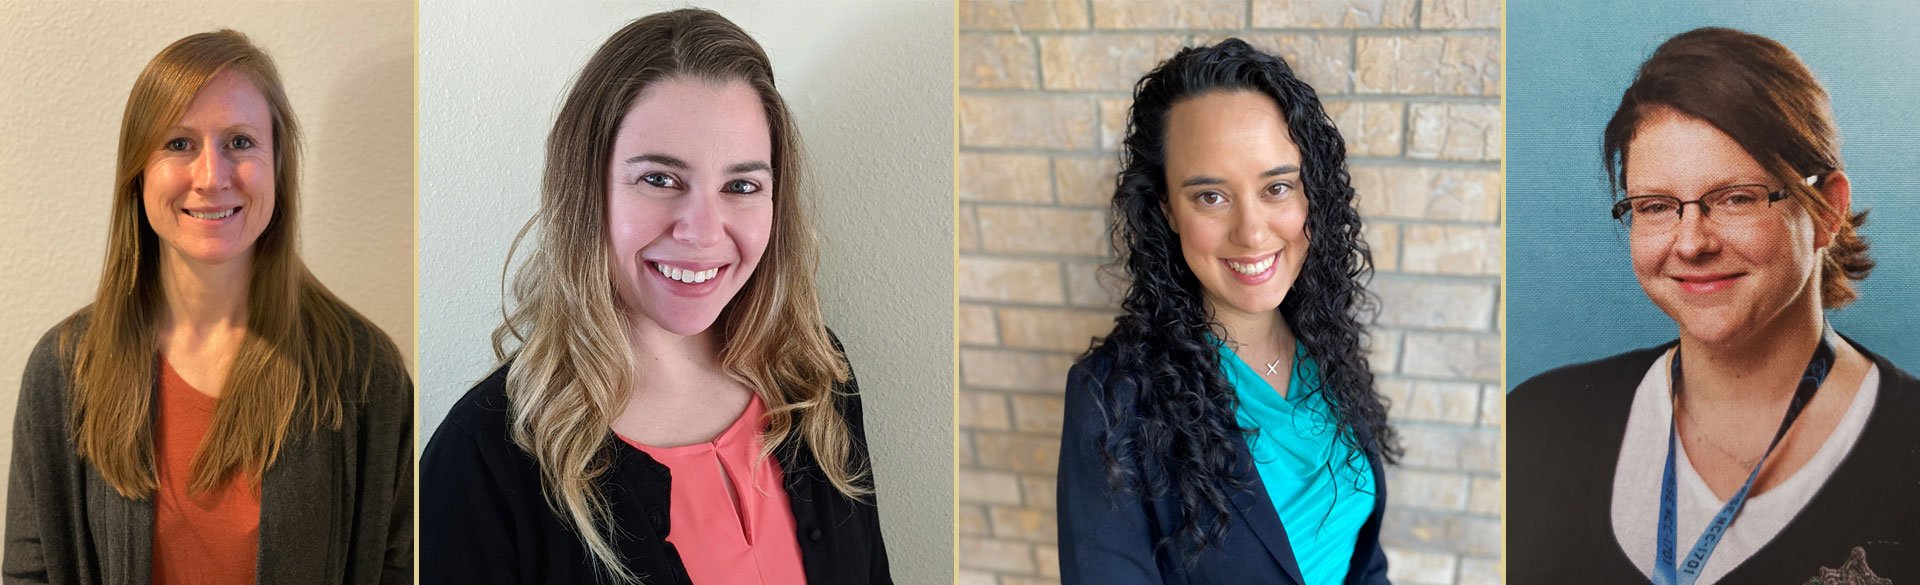 CU Nursing Students to Present at NACNS Conference